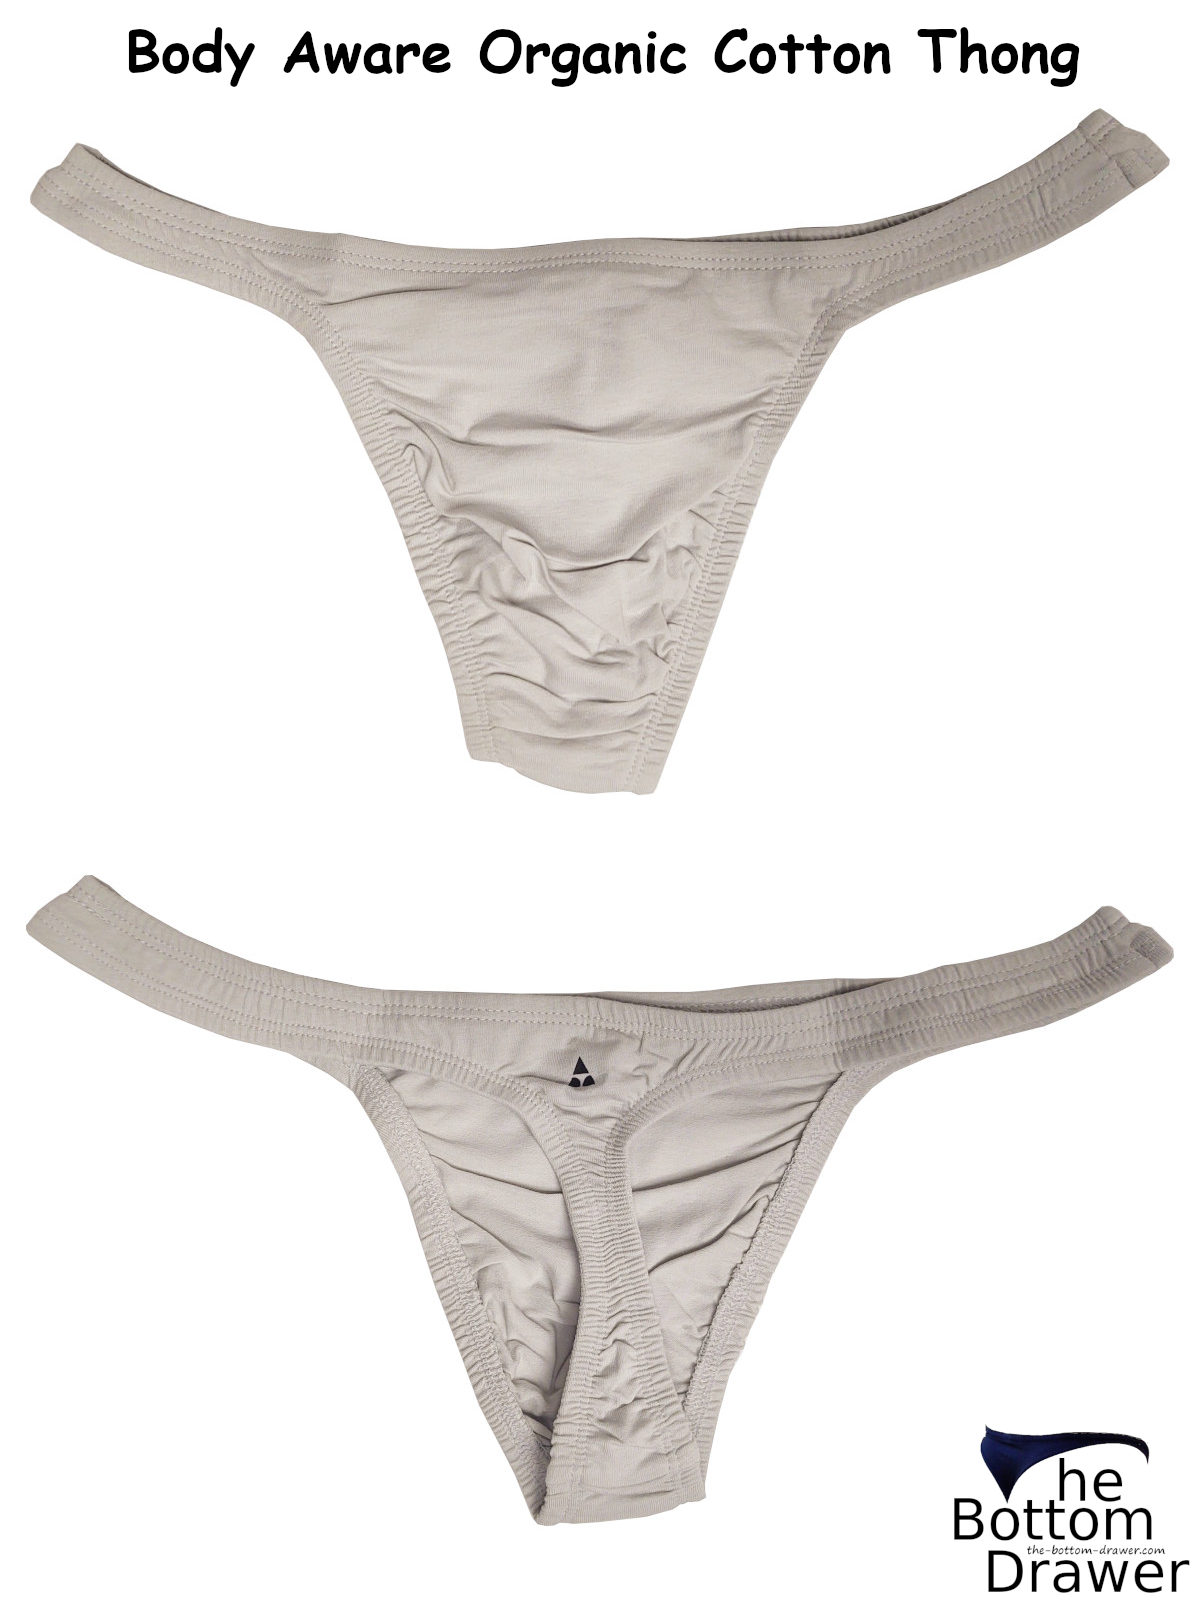 Review: Body Aware Organic Cotton Thong - The Bottom Drawer